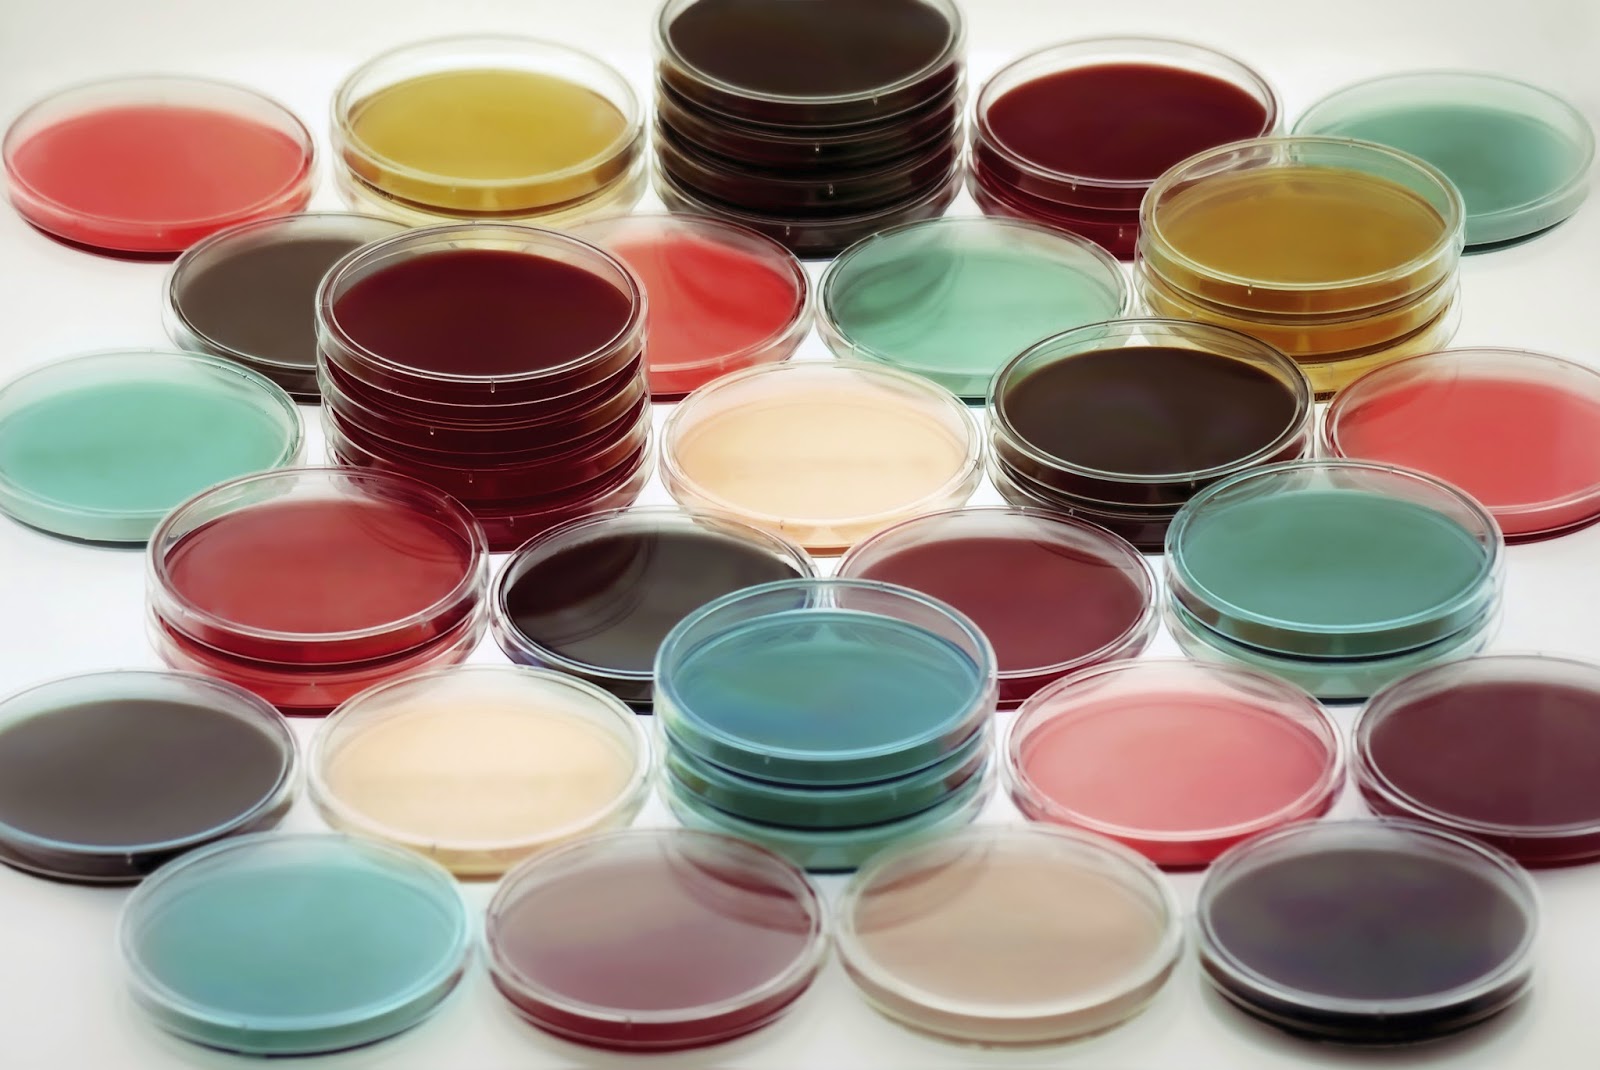 View From The Petri Dish: Current techniques used in the quality